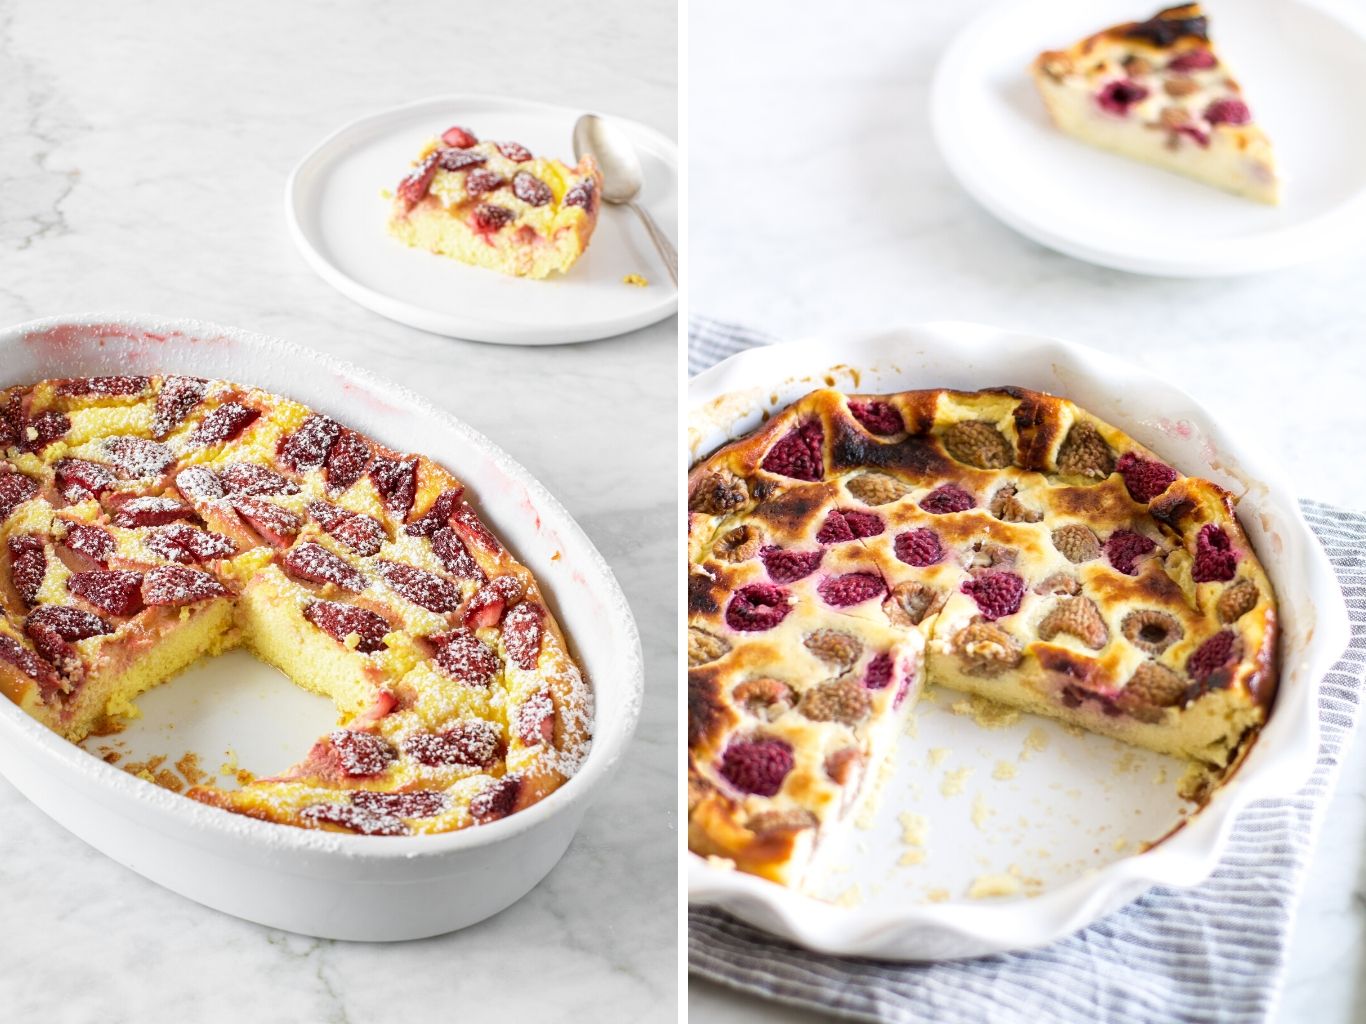 Raspberry Ricotta Soufflé and Strawberry Ricotta Soufflé baked in white 1 quart dishes | verygoodcook.com